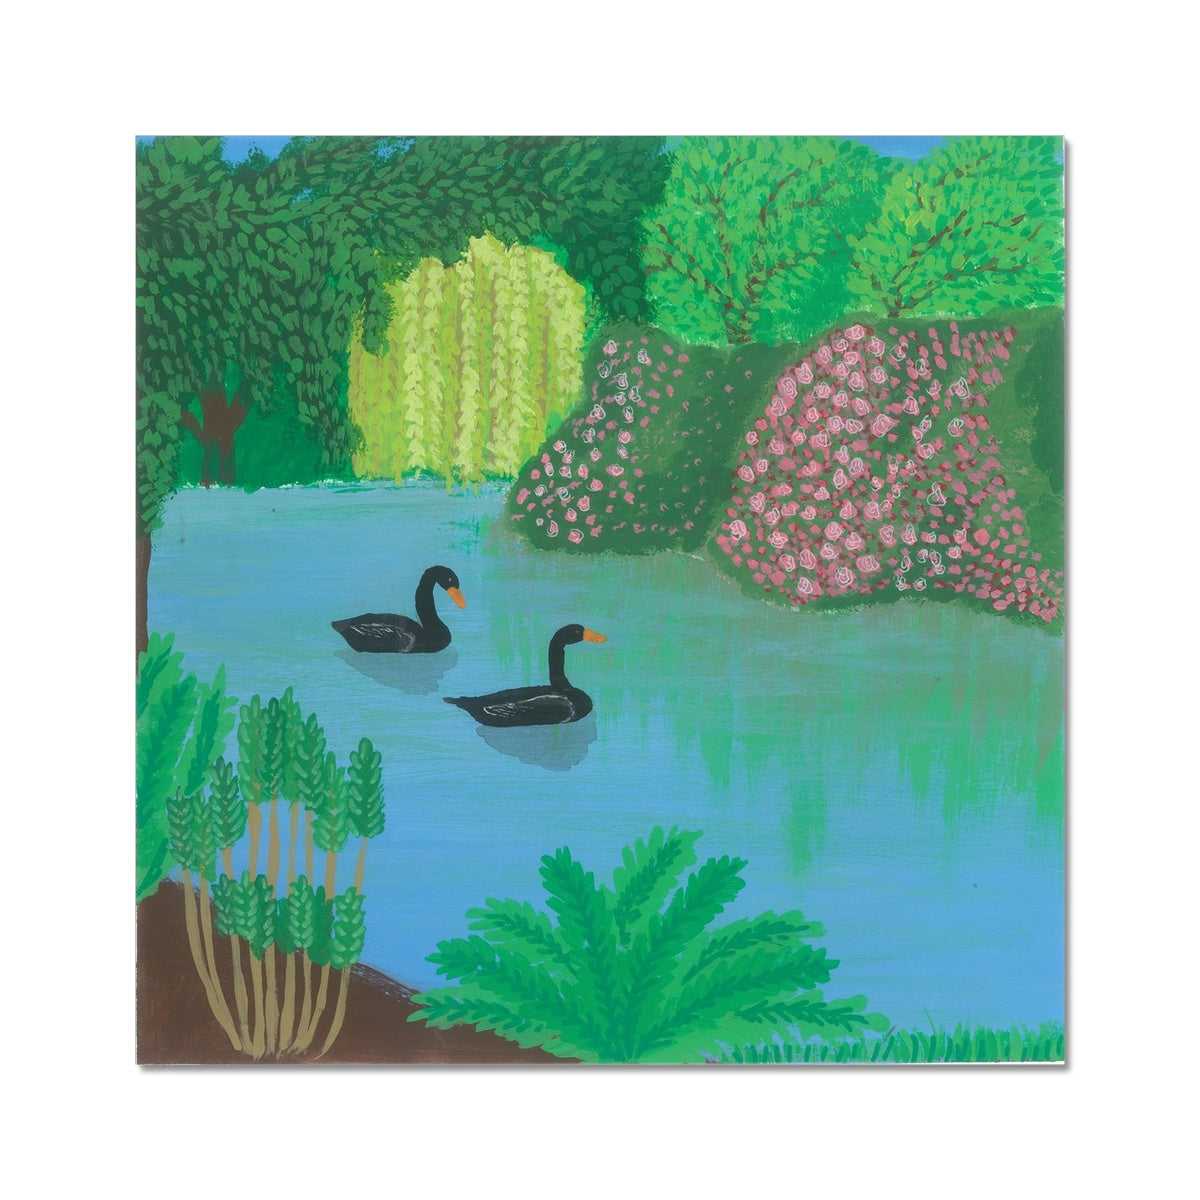 Brent Geese grazing - Tranquil Morning by the Lakeside with Swans and Blossoms Fine Art Print - nature soundscape art - earth.fm